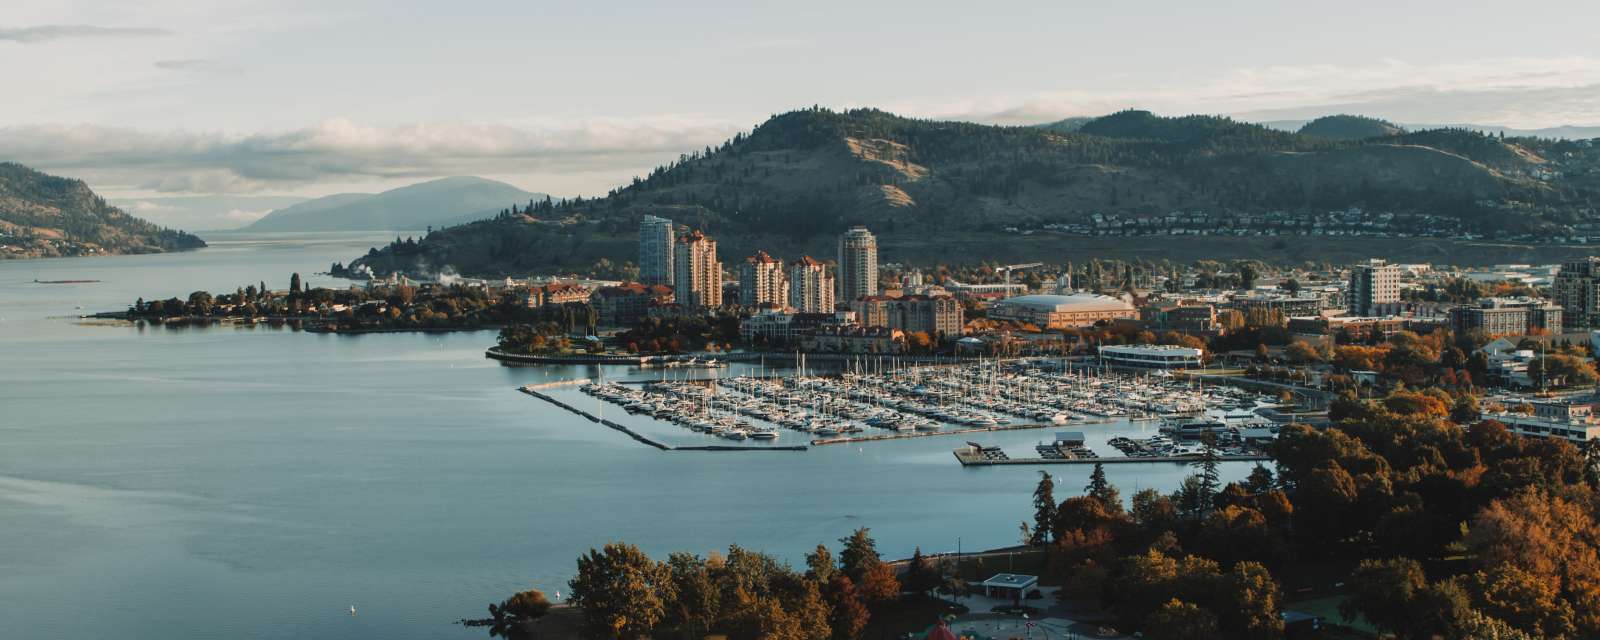 The small city that offers everything. | Tourism Kelowna